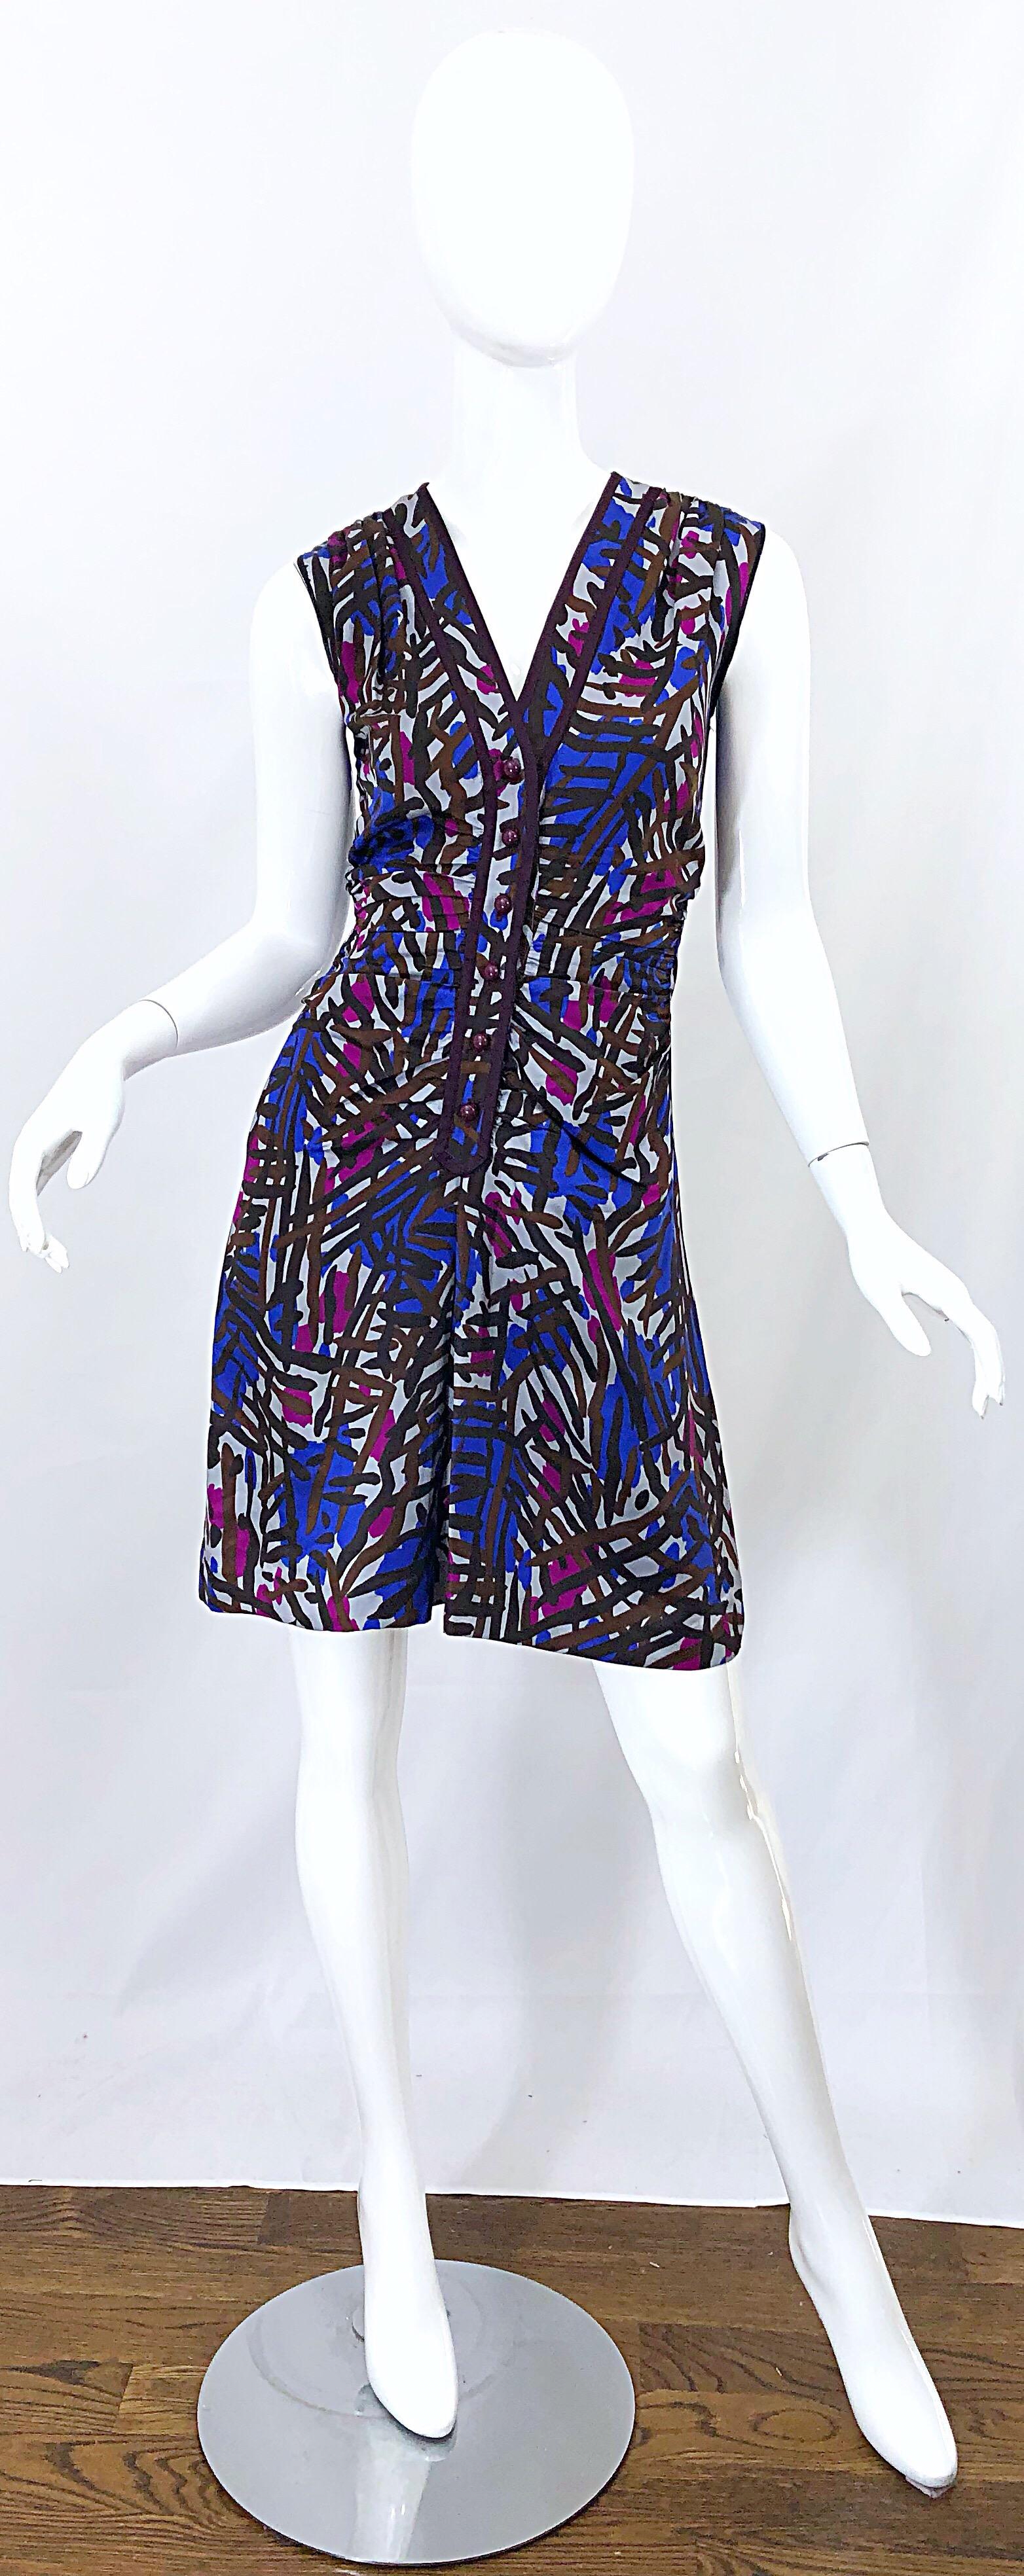 Spectacular vintage YVES SAINT LAURENT Rive Gauche YSL tribal graffiti print silk dress! Features vibrant colors of purple, fuchsia pink, brown and burgundy throughout. Buttons up the front with hook-and-eye closure above the top button. Flattering